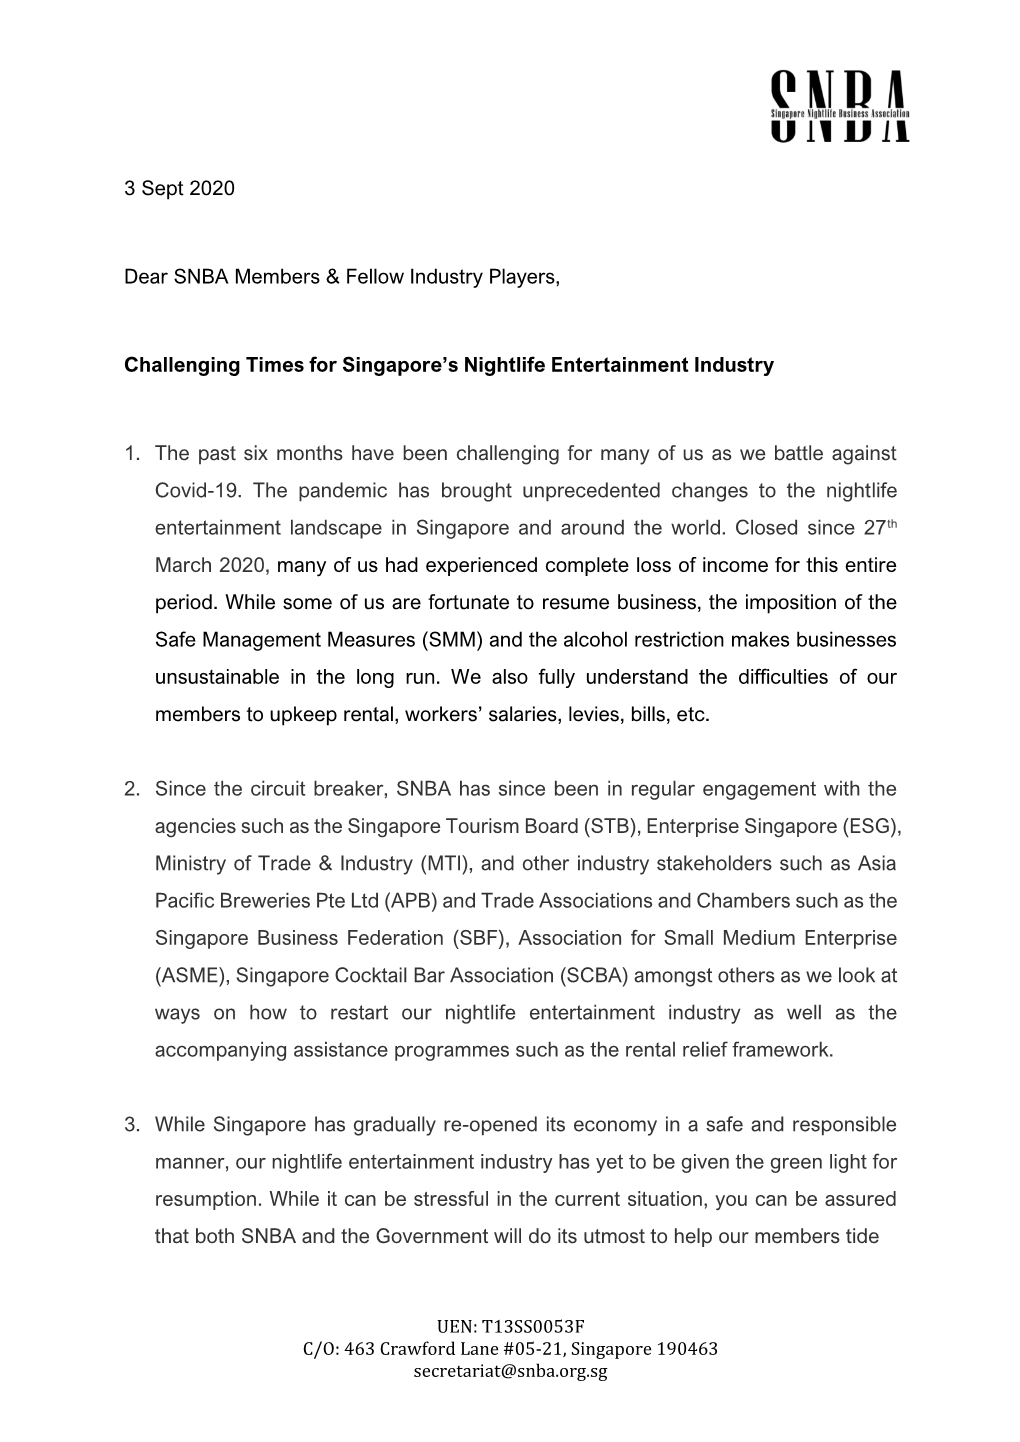 3 Sept 2020 Dear SNBA Members & Fellow Industry Players, Challenging Times for Singapore's Nightlife Entertainment Industr